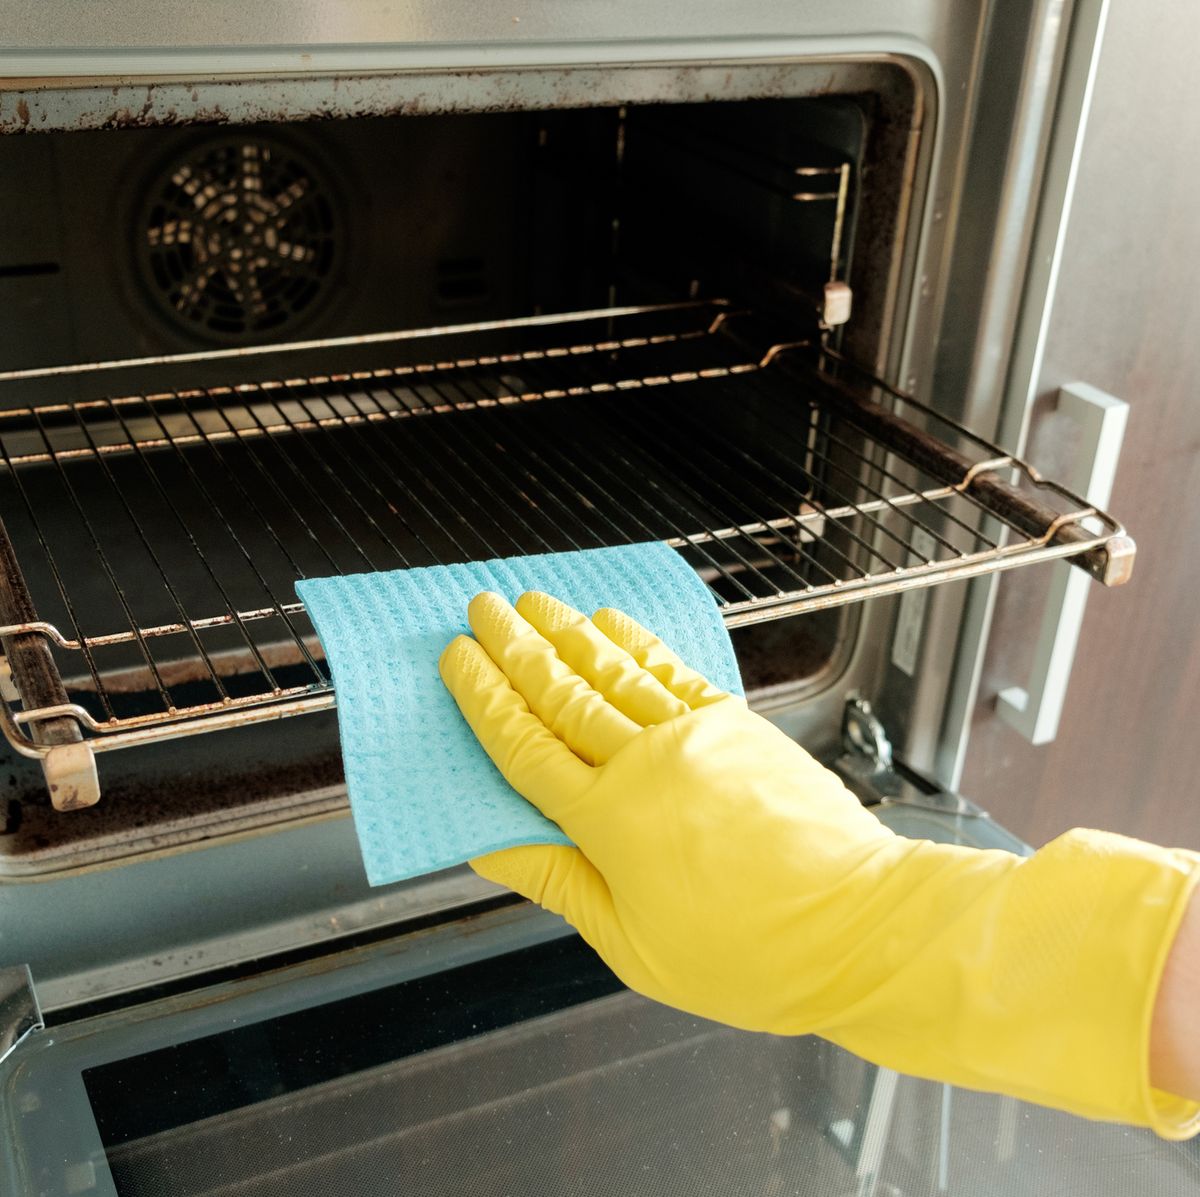 How to Deep Clean Your Oven With Baking Soda